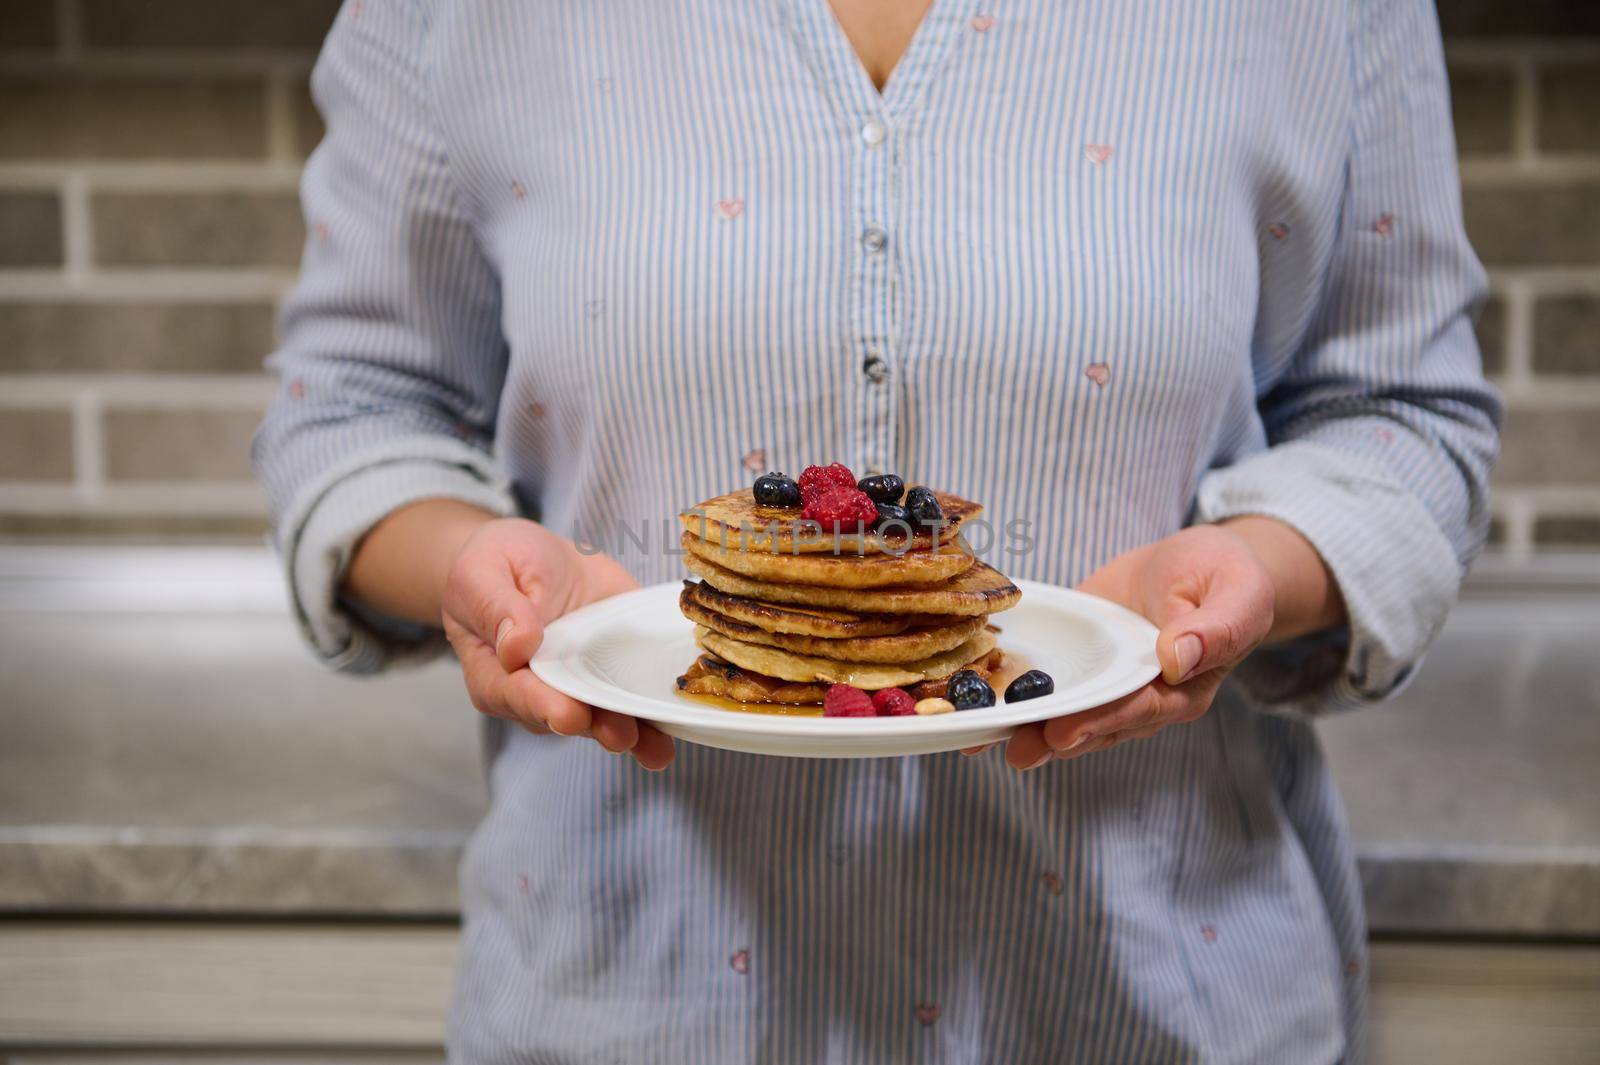 Woman holding plate of delicious homemade pancakes garnished with raspberries, blueberries and cashews, standing against kitchen countertop. Food for Shrovetide, Shrove Tuesday concept. Cropped image. by artgf